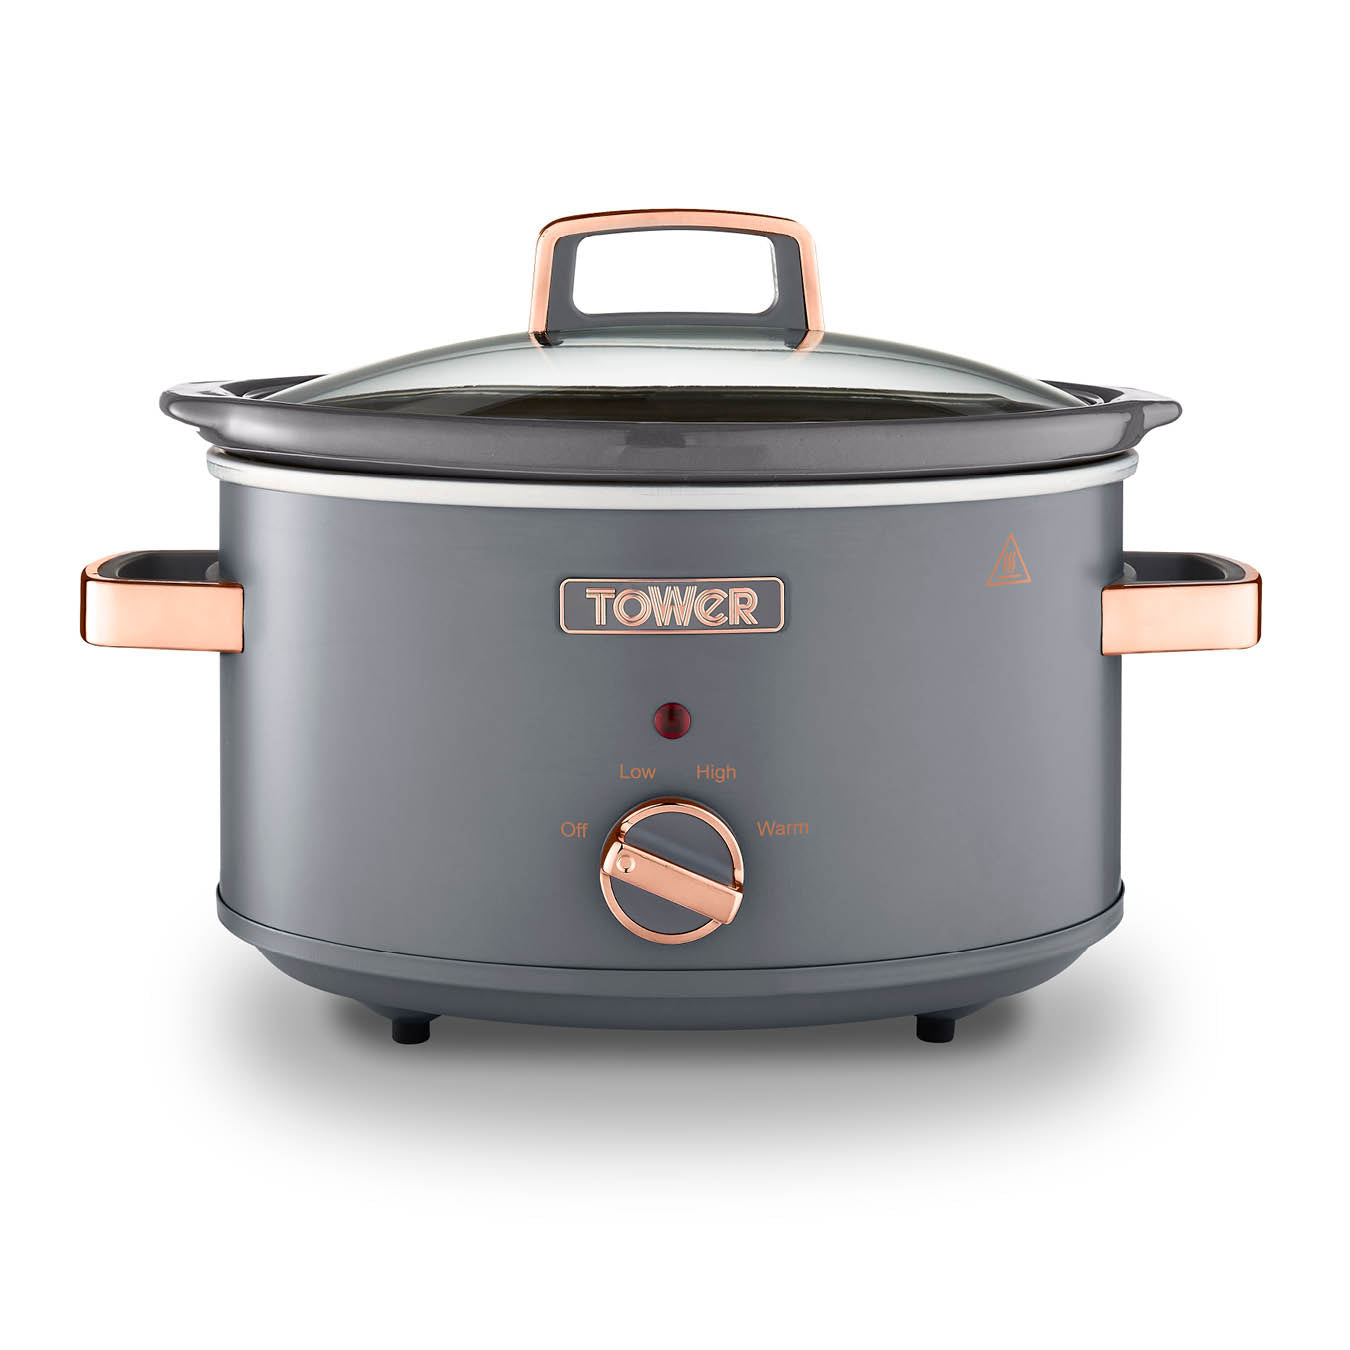 Tower Cavaletto 3.5 Litre Slow Cooker - Grey  | TJ Hughes